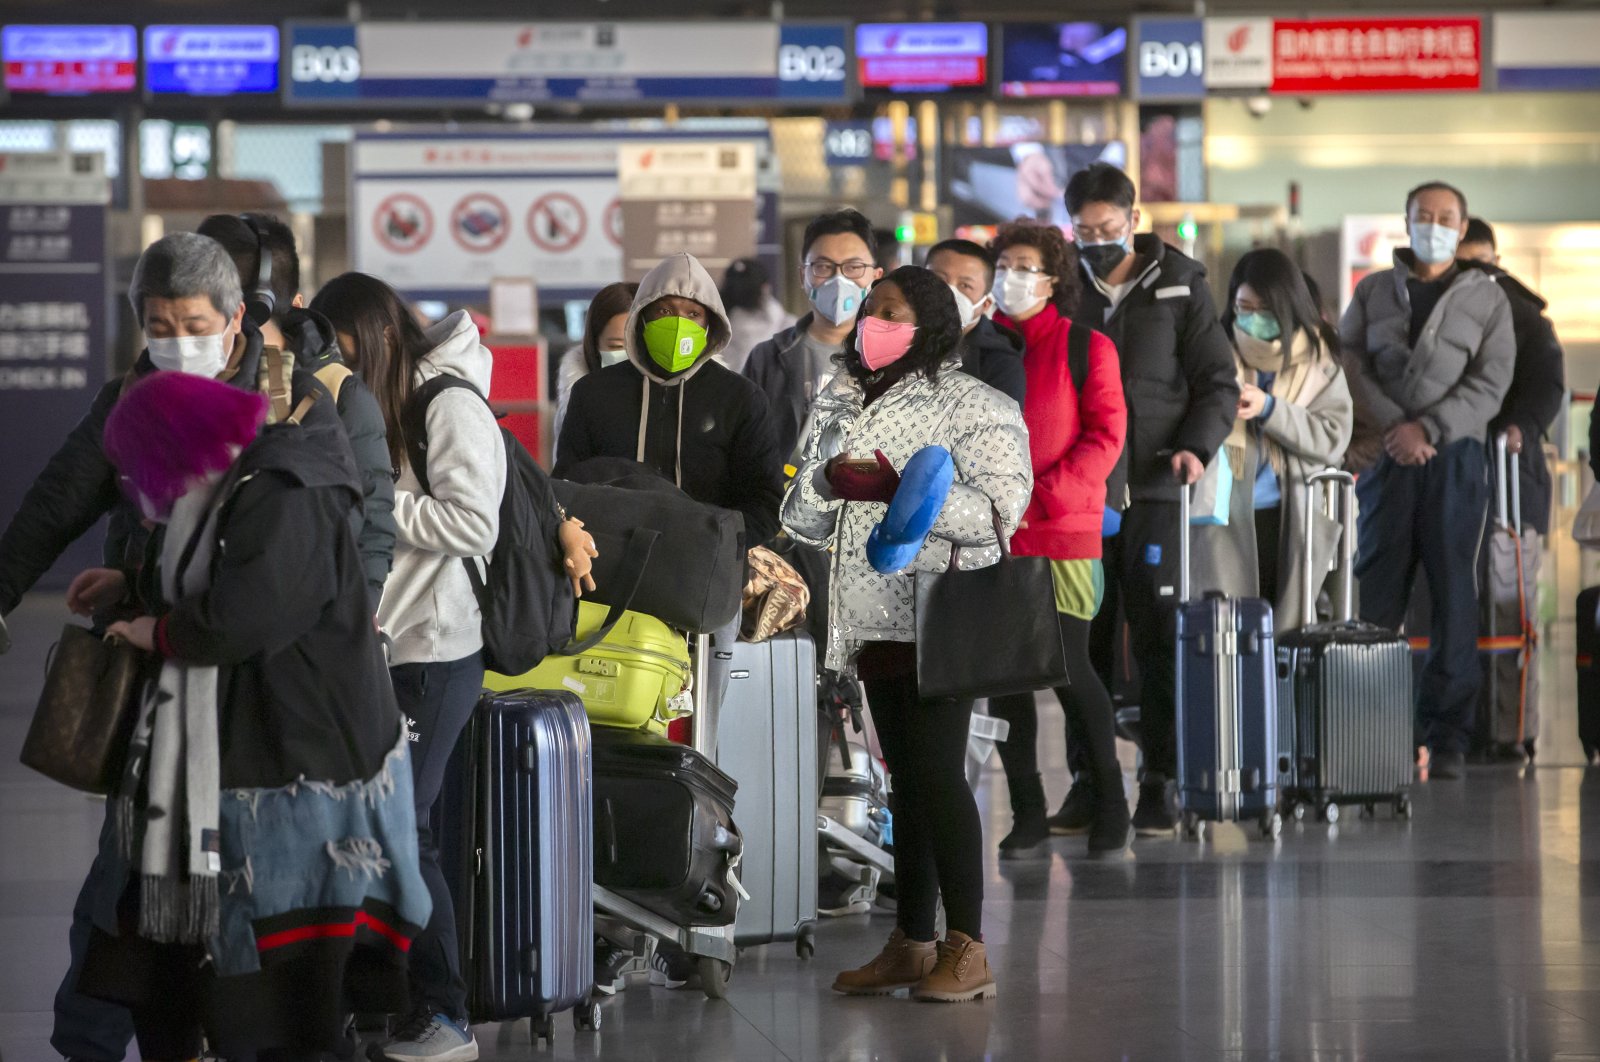 Travelers wearing face masks line up to check in for a flight at Beijing Capital International Airport in Beijing, China, Jan. 30, 2020. (AP Photo)